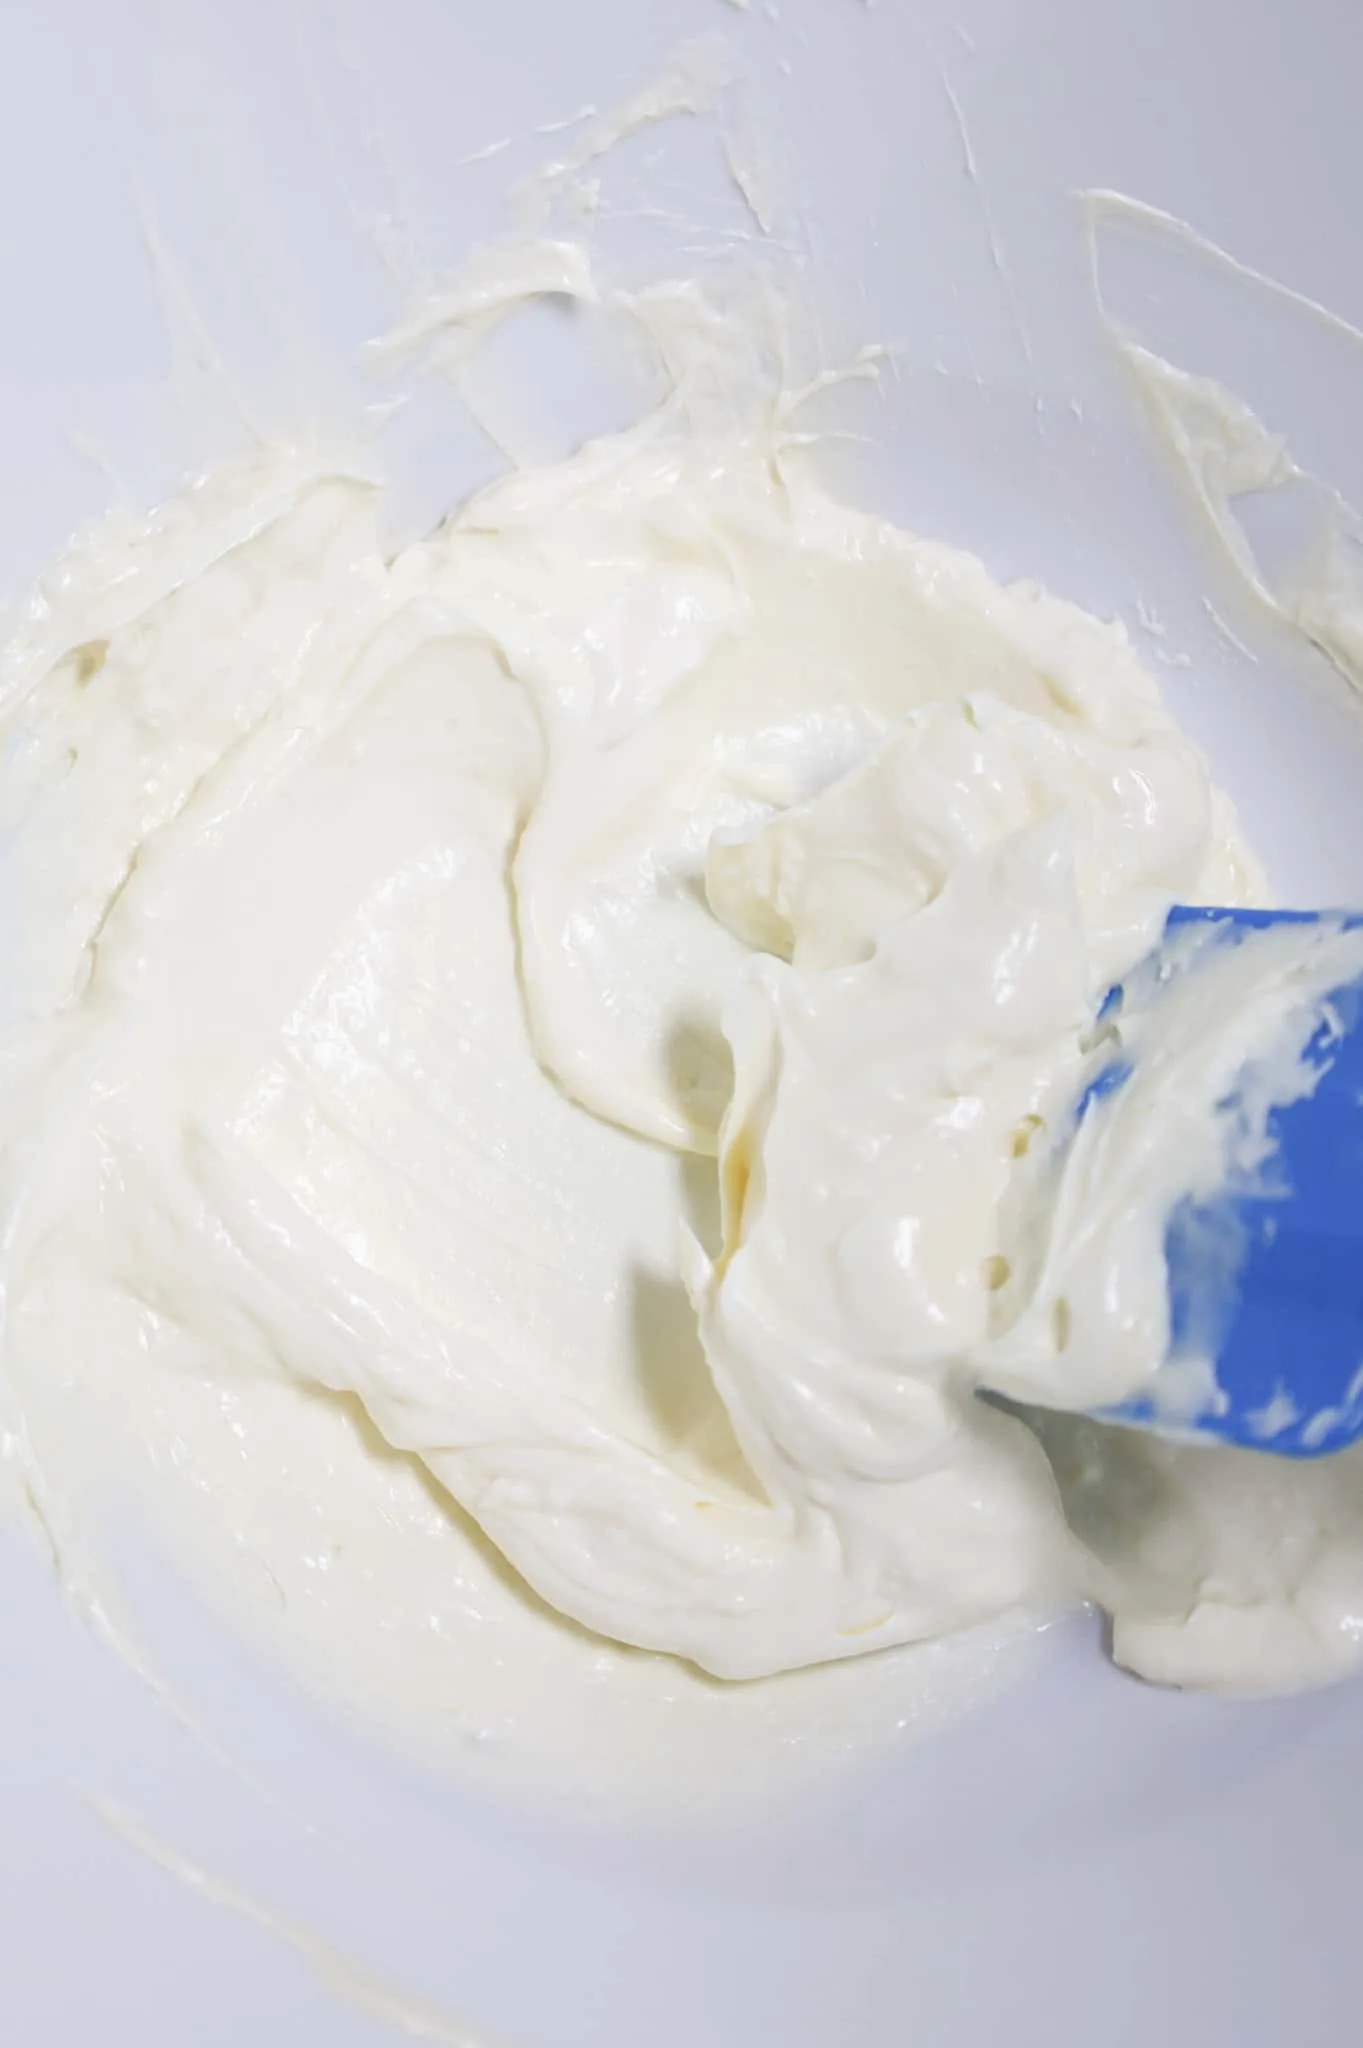 sour cream and mayo mixture in mixing bowl